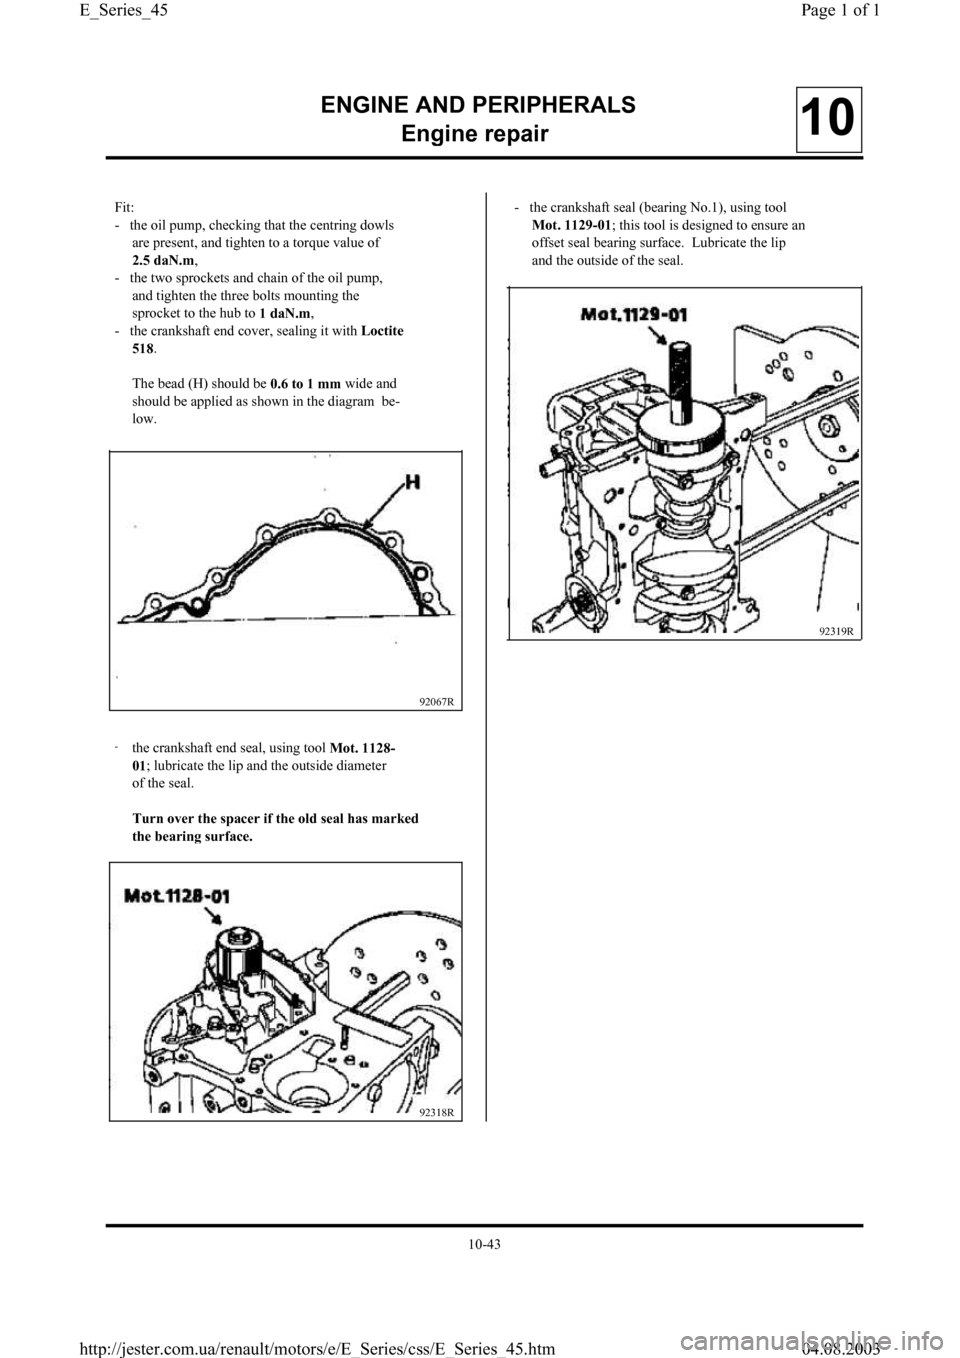 RENAULT CLIO 1997 X57 / 1.G Petrol Engines Workshop Manual ENGINE AND PERIPHERALS
En
gine repair10
Fit:
-   the oil pump, checking that the centring dowls
are present, and tighten to a torque value of
2.5 daN.m,
-   the two sprockets and chain of the oil pump